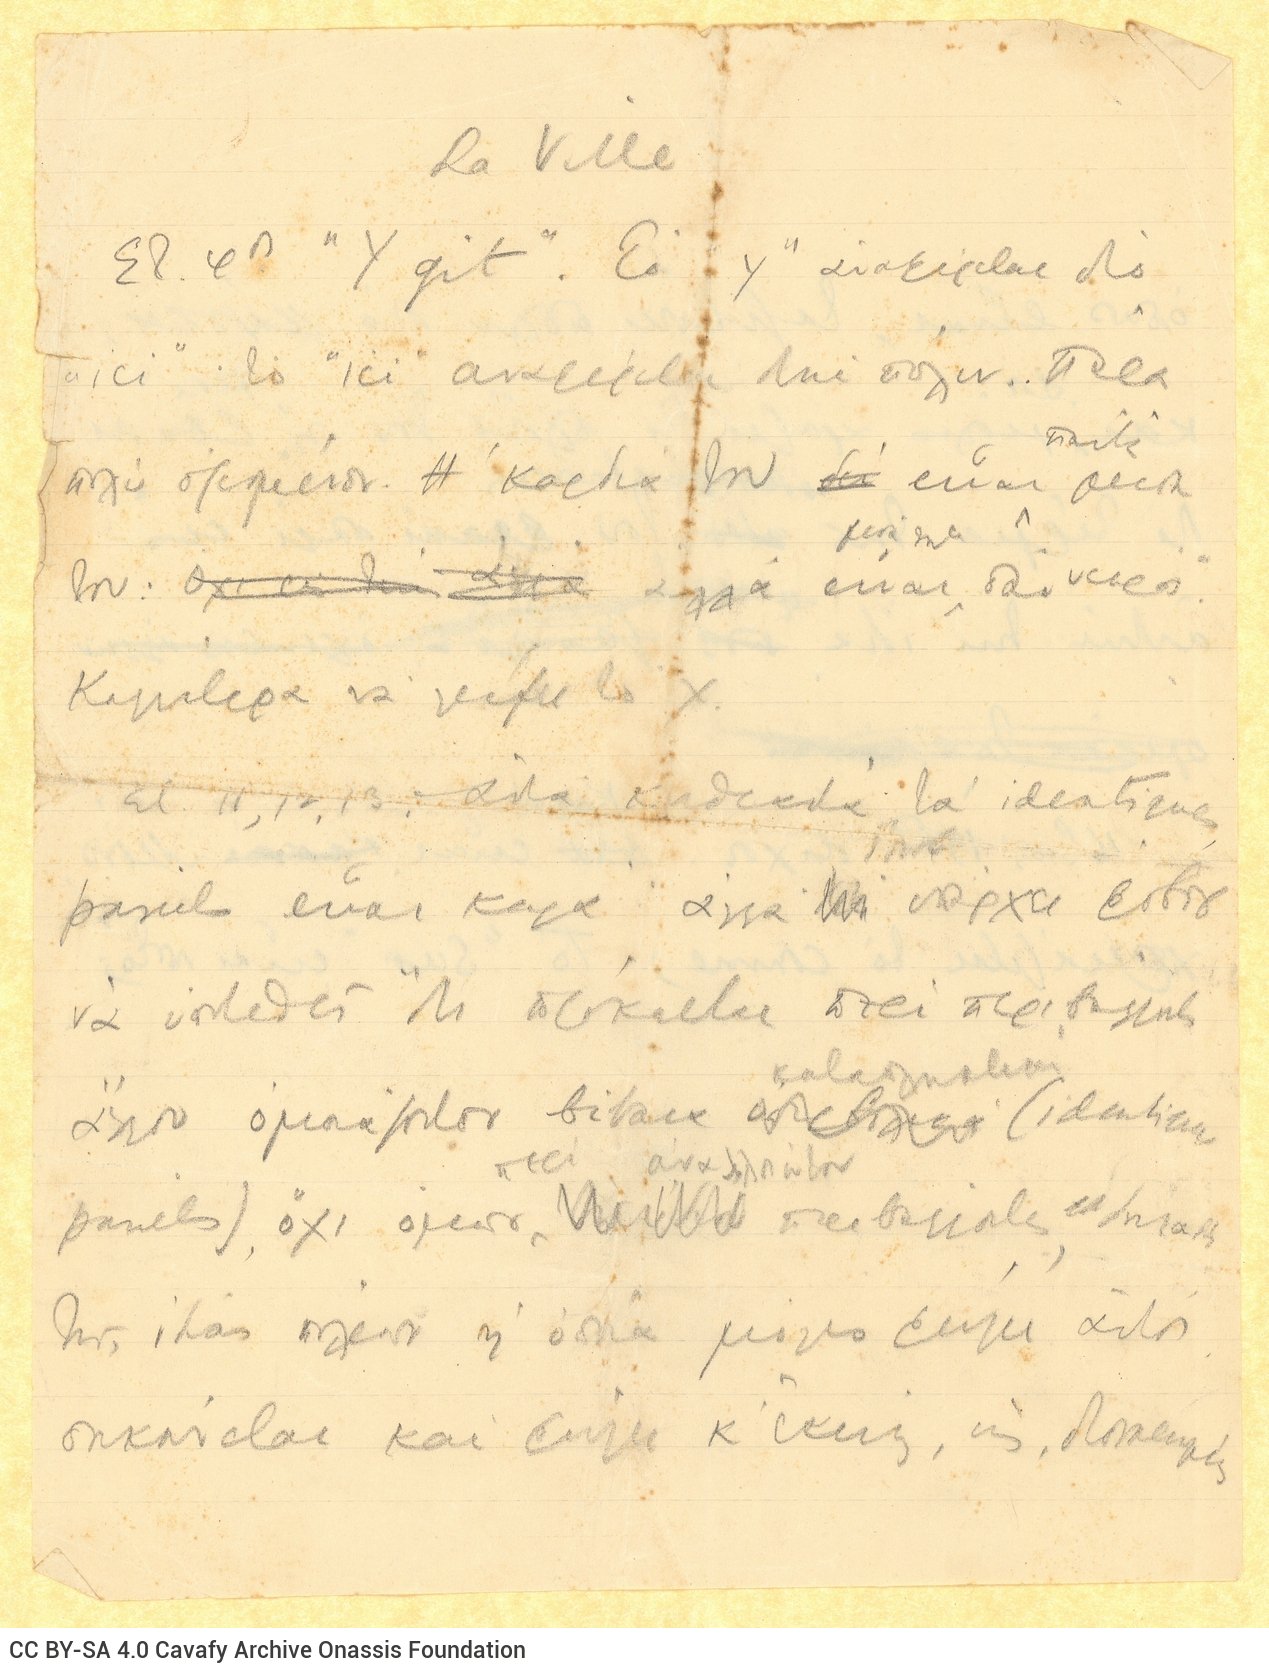 Handwritten comments and remarks by Cavafy on the French translation of the poem "The City" («La Ville»); his notes are 